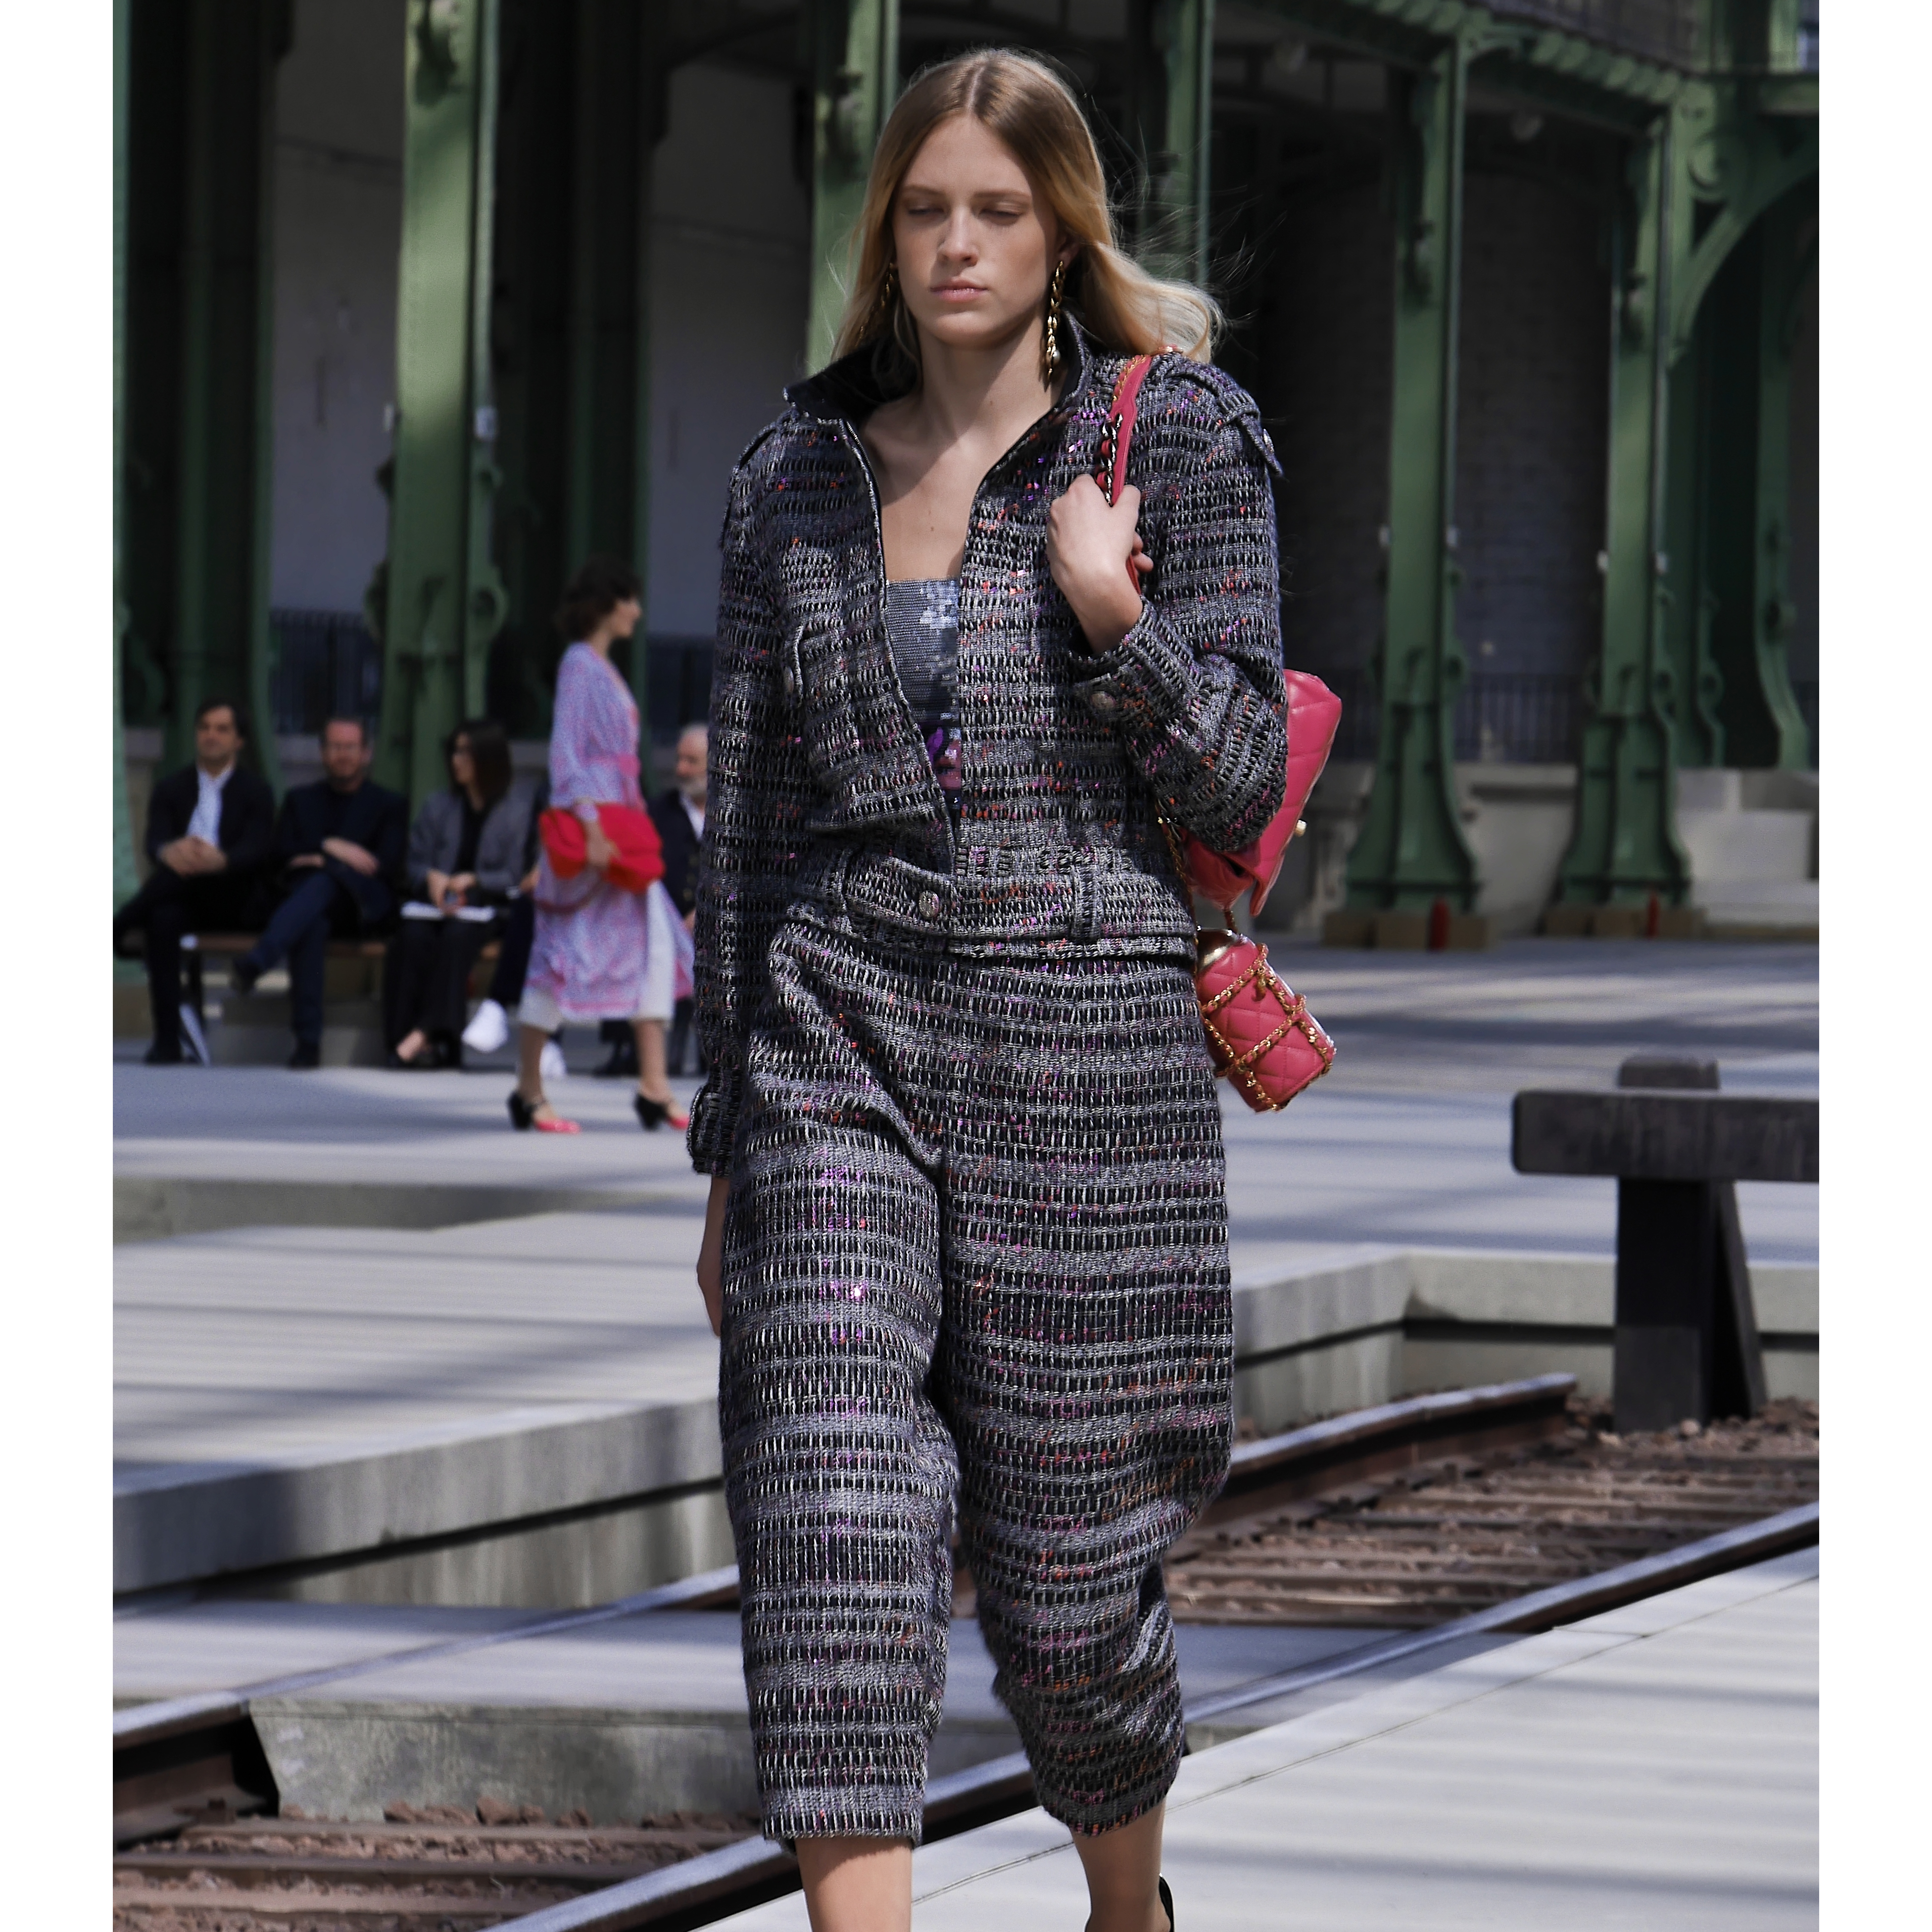 CHANEL CRUISE 2020 – A VISION BY FRANK PERRIN | CRASH Magazine